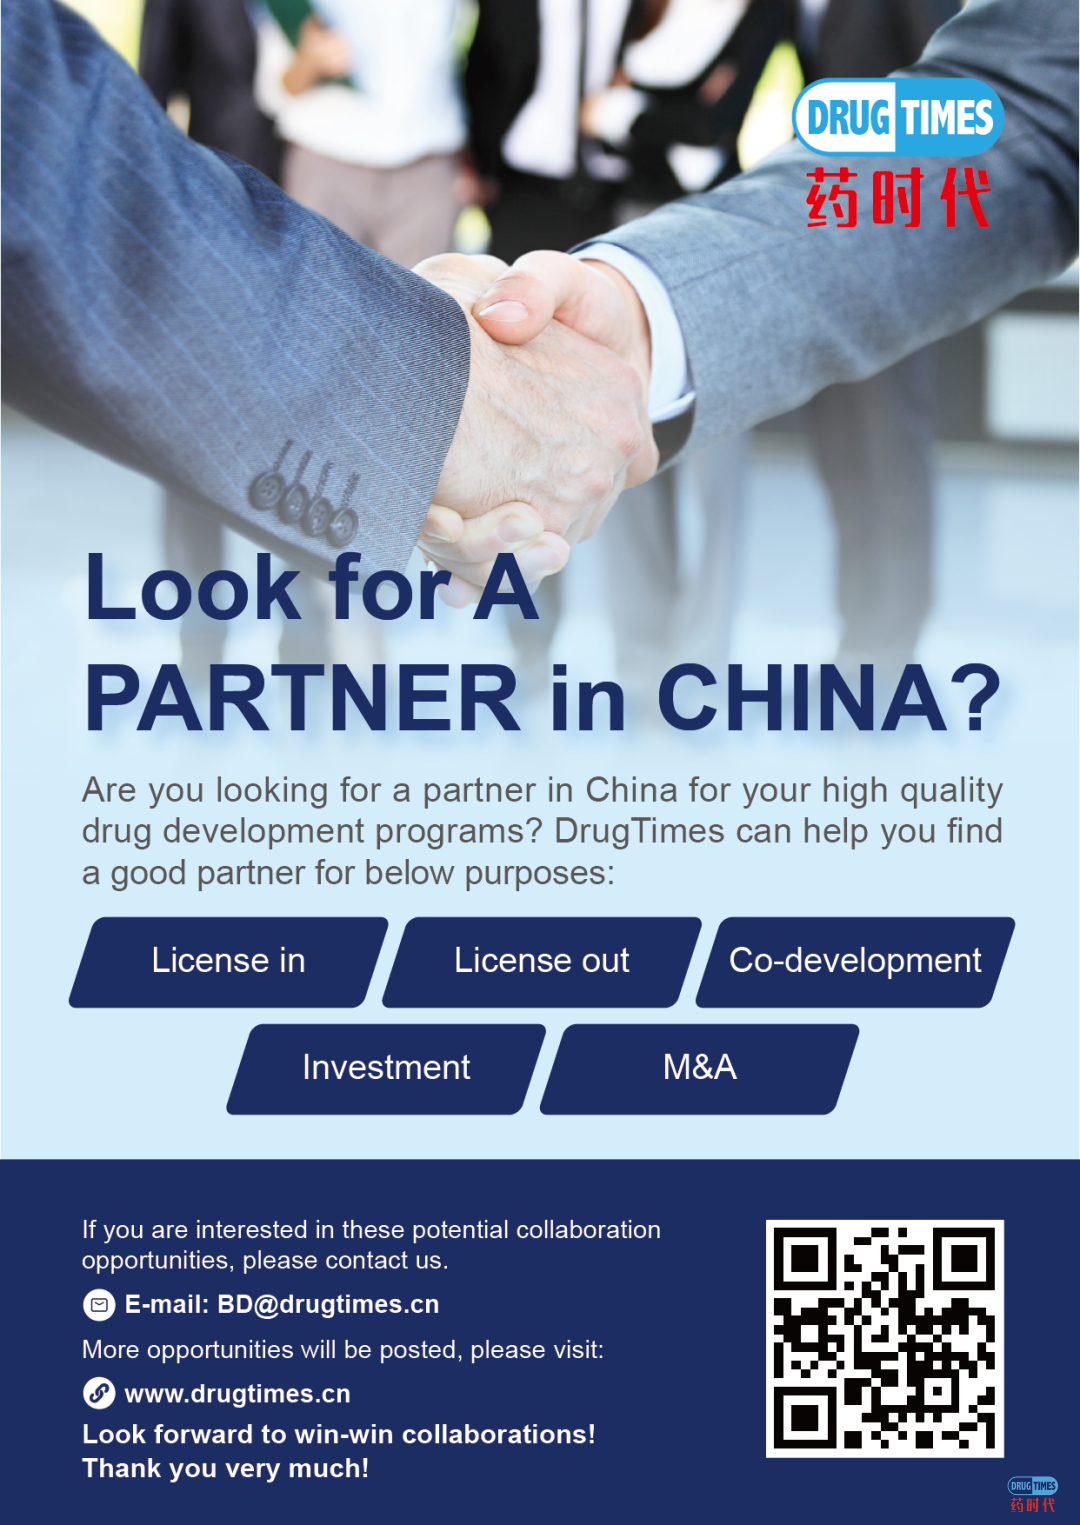 Look for A PARTNER in CHINA? | DrugTimes